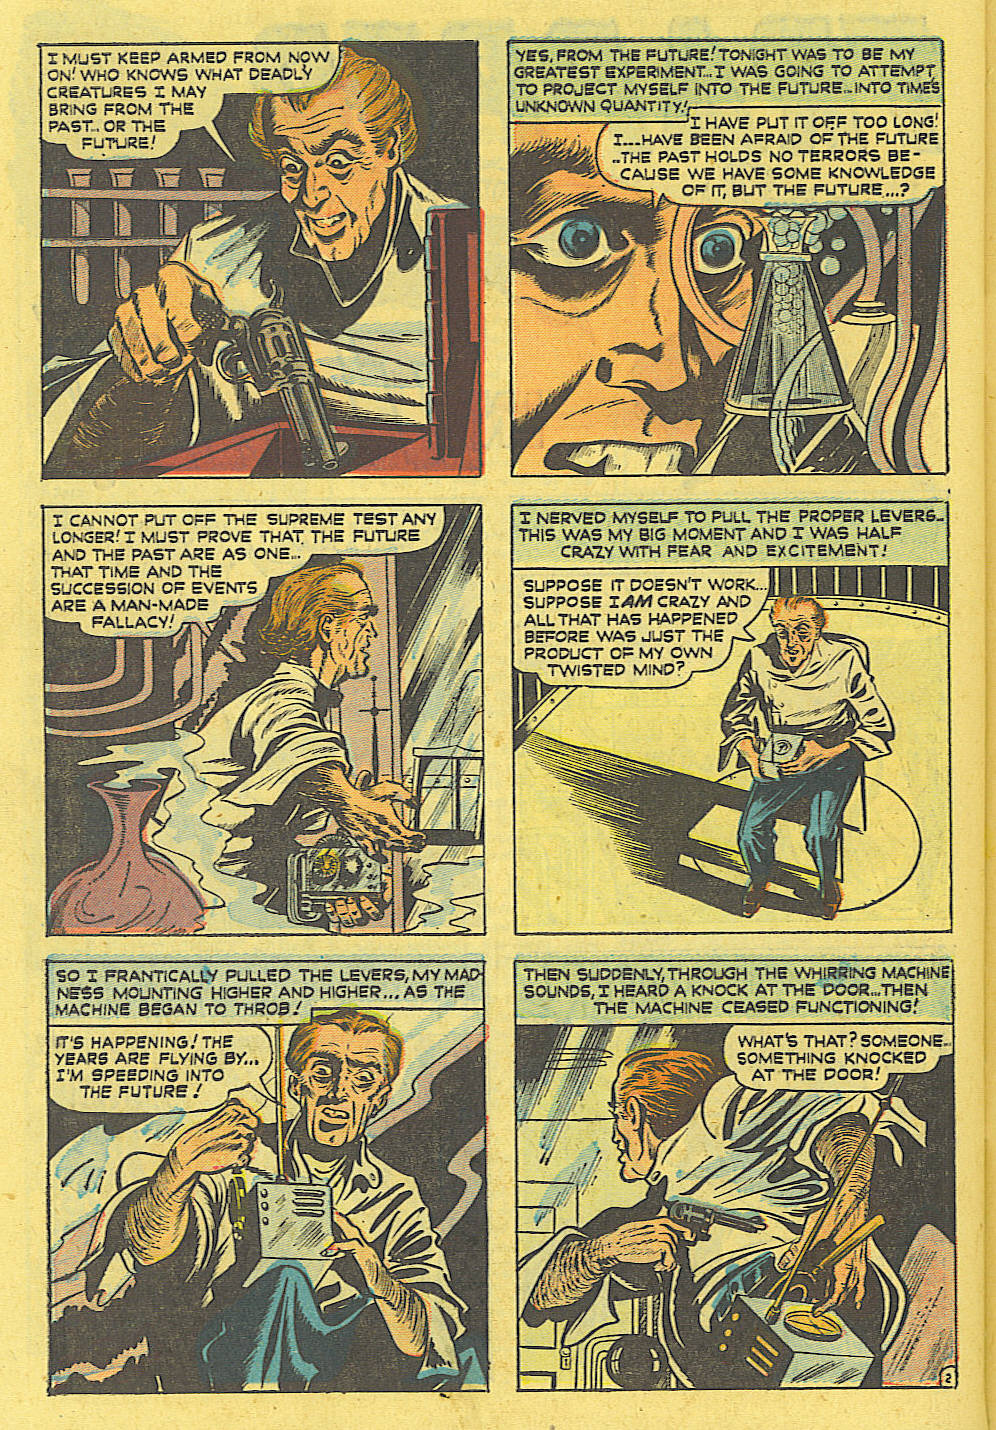 Marvel Tales (1949) 95 Page 21